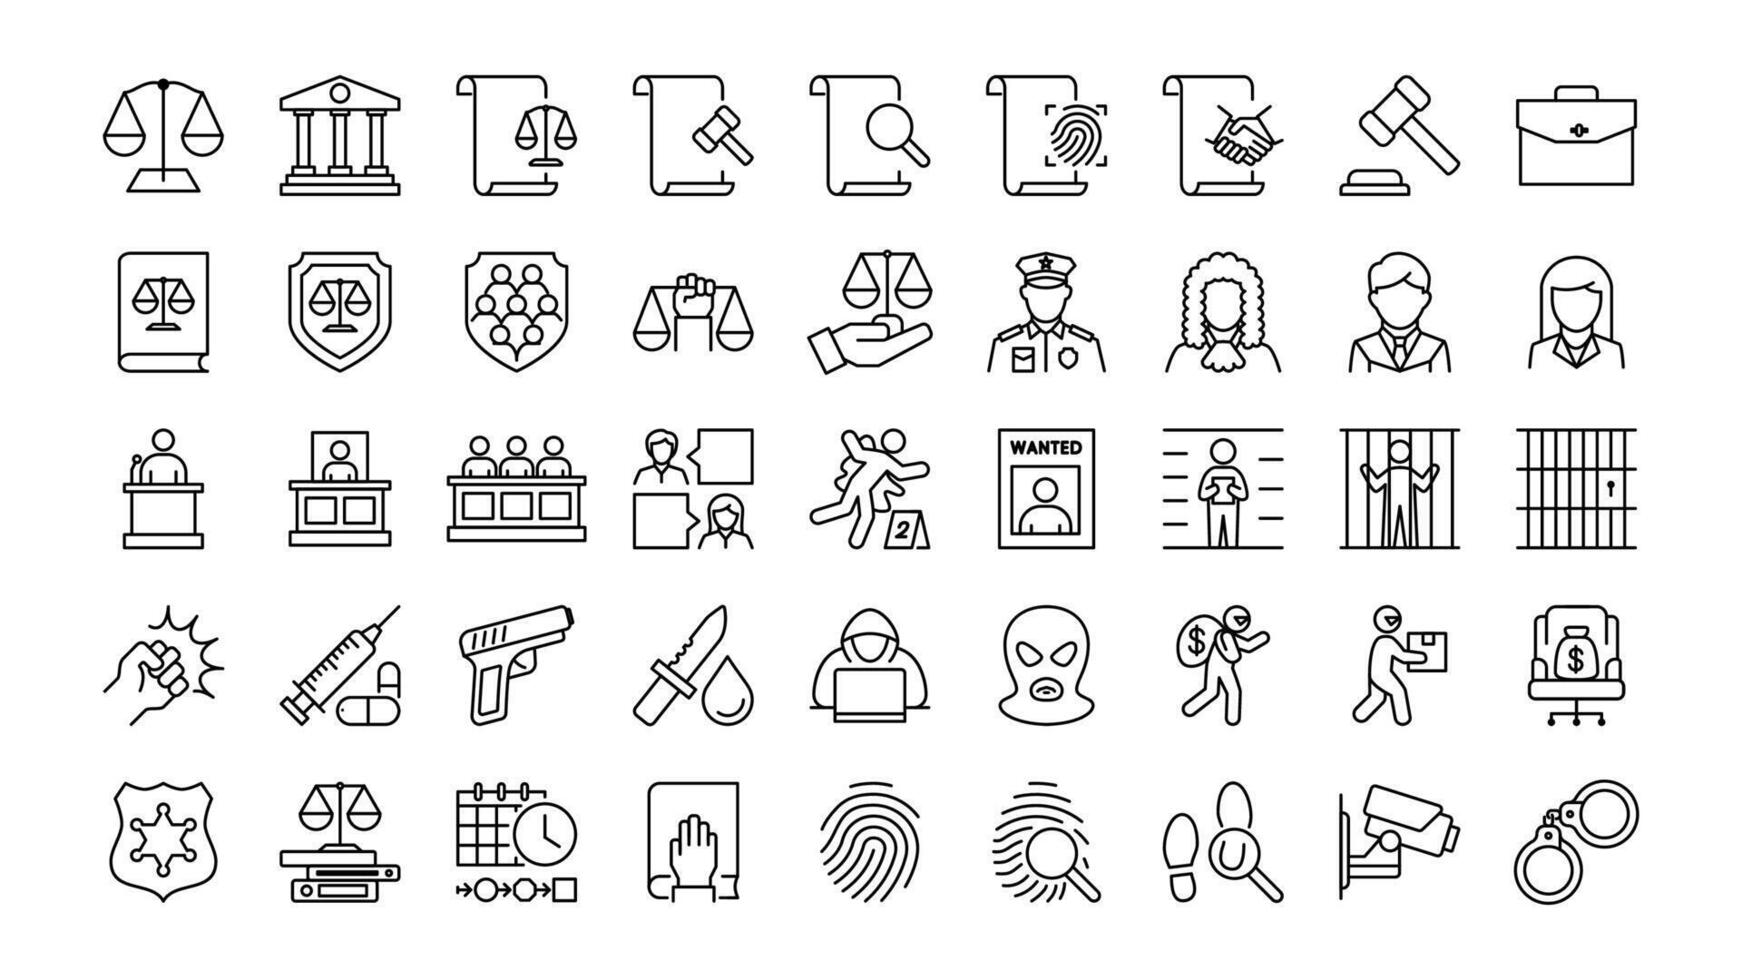 Law and Justice line icons set. Includes Court, Inspector, Lawyer, Guilty, Arrest, and More. vector